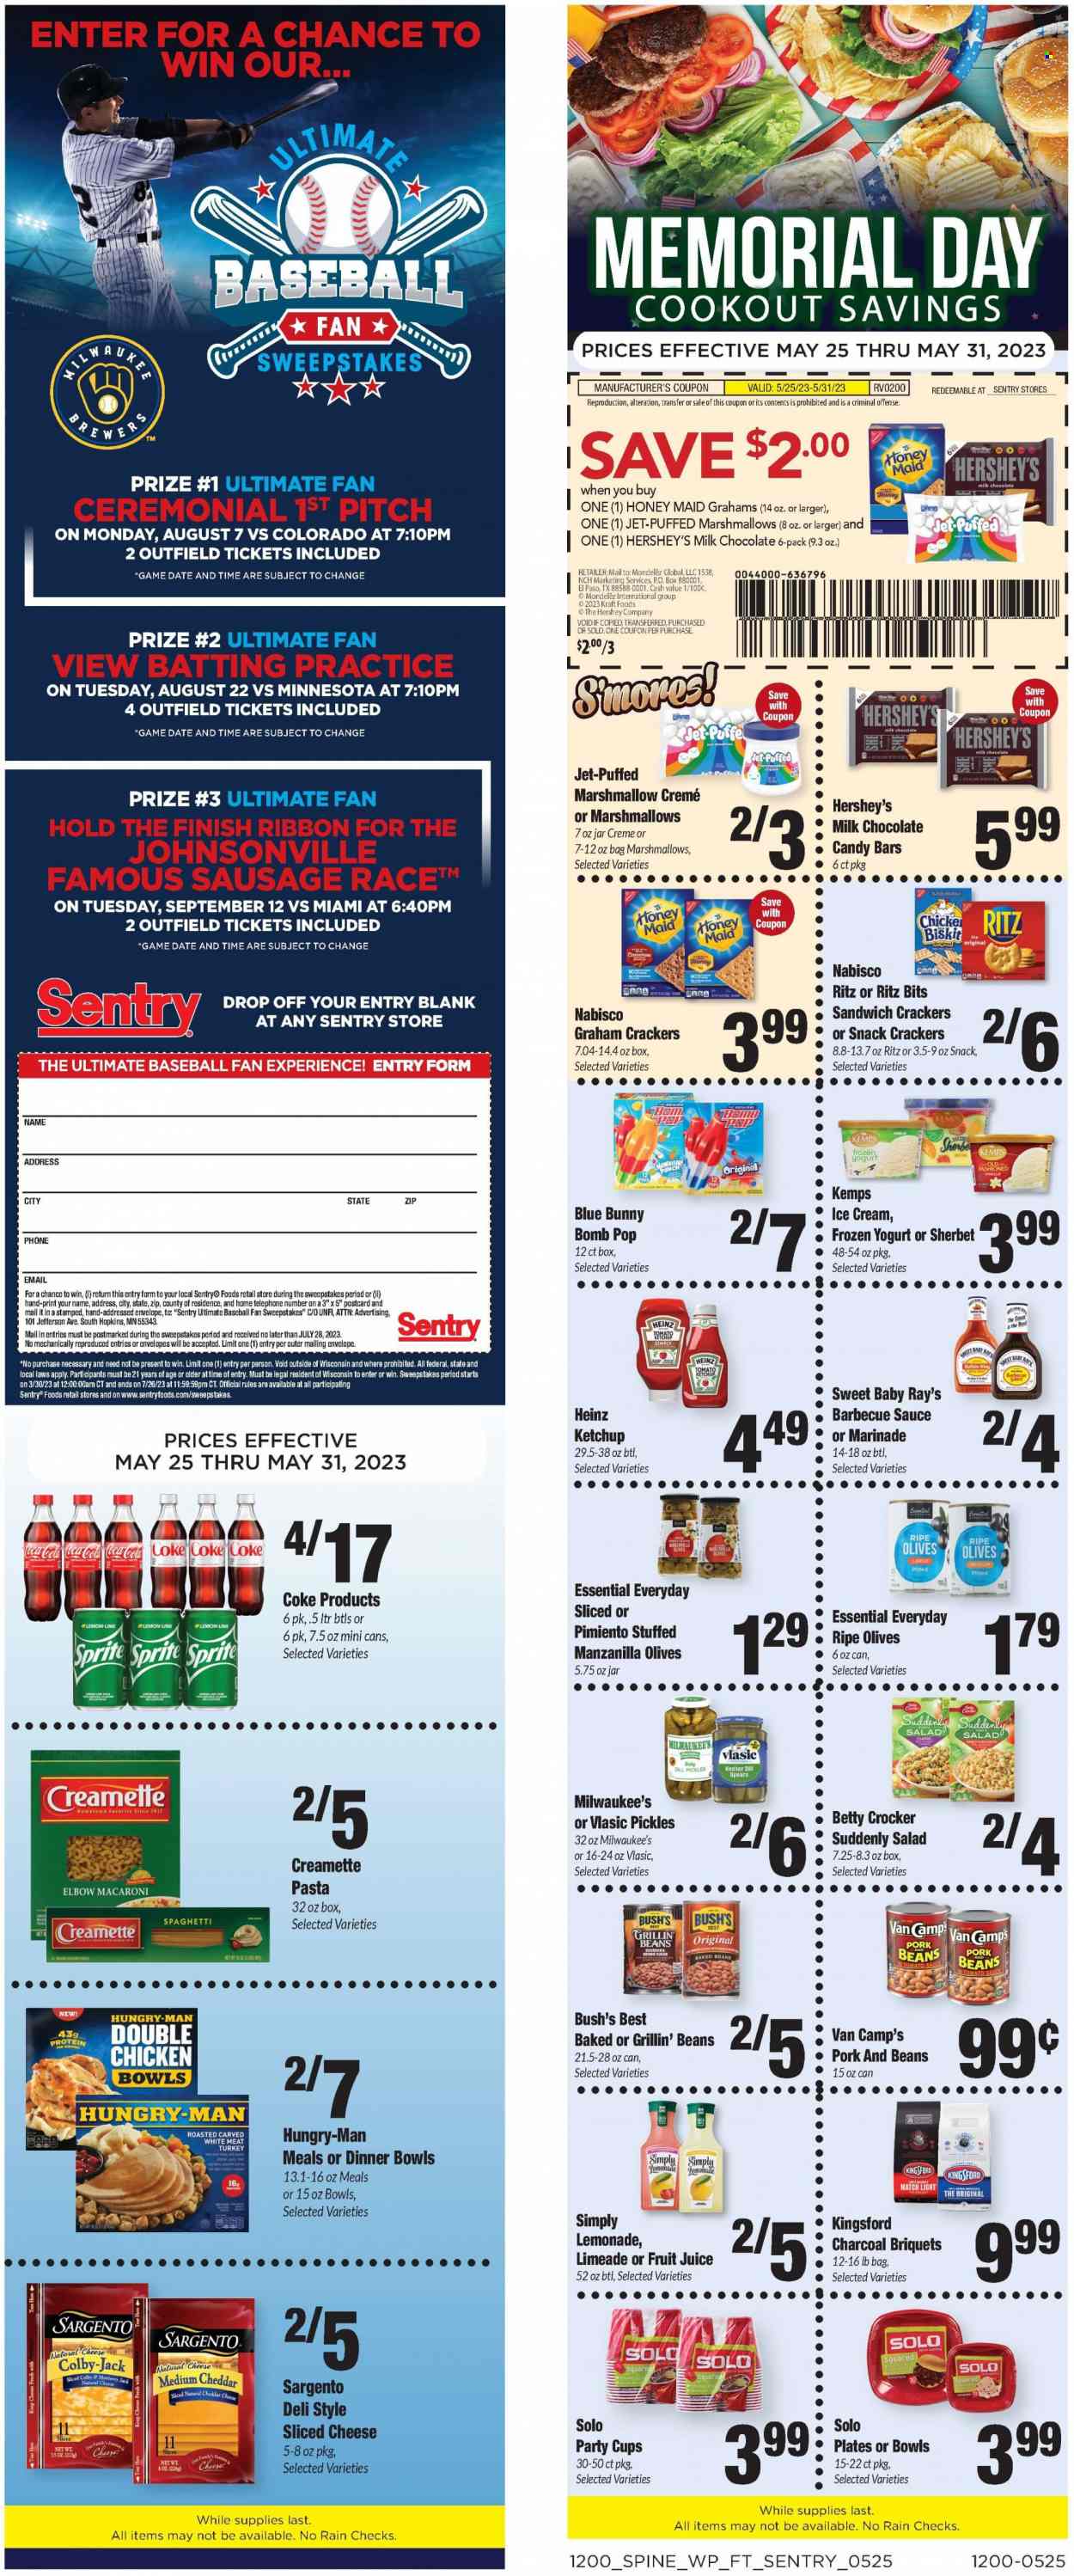 thumbnail - Sentry Foods Flyer - 05/25/2023 - 05/31/2023 - Sales products - beans, salad, spaghetti, macaroni, pasta, Kraft®, Kingsford, bacon, Johnsonville, sausage, Colby cheese, Monterey Jack cheese, sliced cheese, cheese, Kemps, Sargento, ice cream, sherbet, Hershey's, Blue Bunny, graham crackers, marshmallows, milk chocolate, crackers, chocolate candies, RITZ, candy bar, Nabisco, cane sugar, Heinz, pickles, olives, baked beans, Honey Maid, Creamette, dill, cinnamon, BBQ sauce, ketchup, marinade, Coca-Cola, lemonade, Sprite, juice, fruit juice, soft drink, Coke, chicken, turkey, Jet. Page 5.